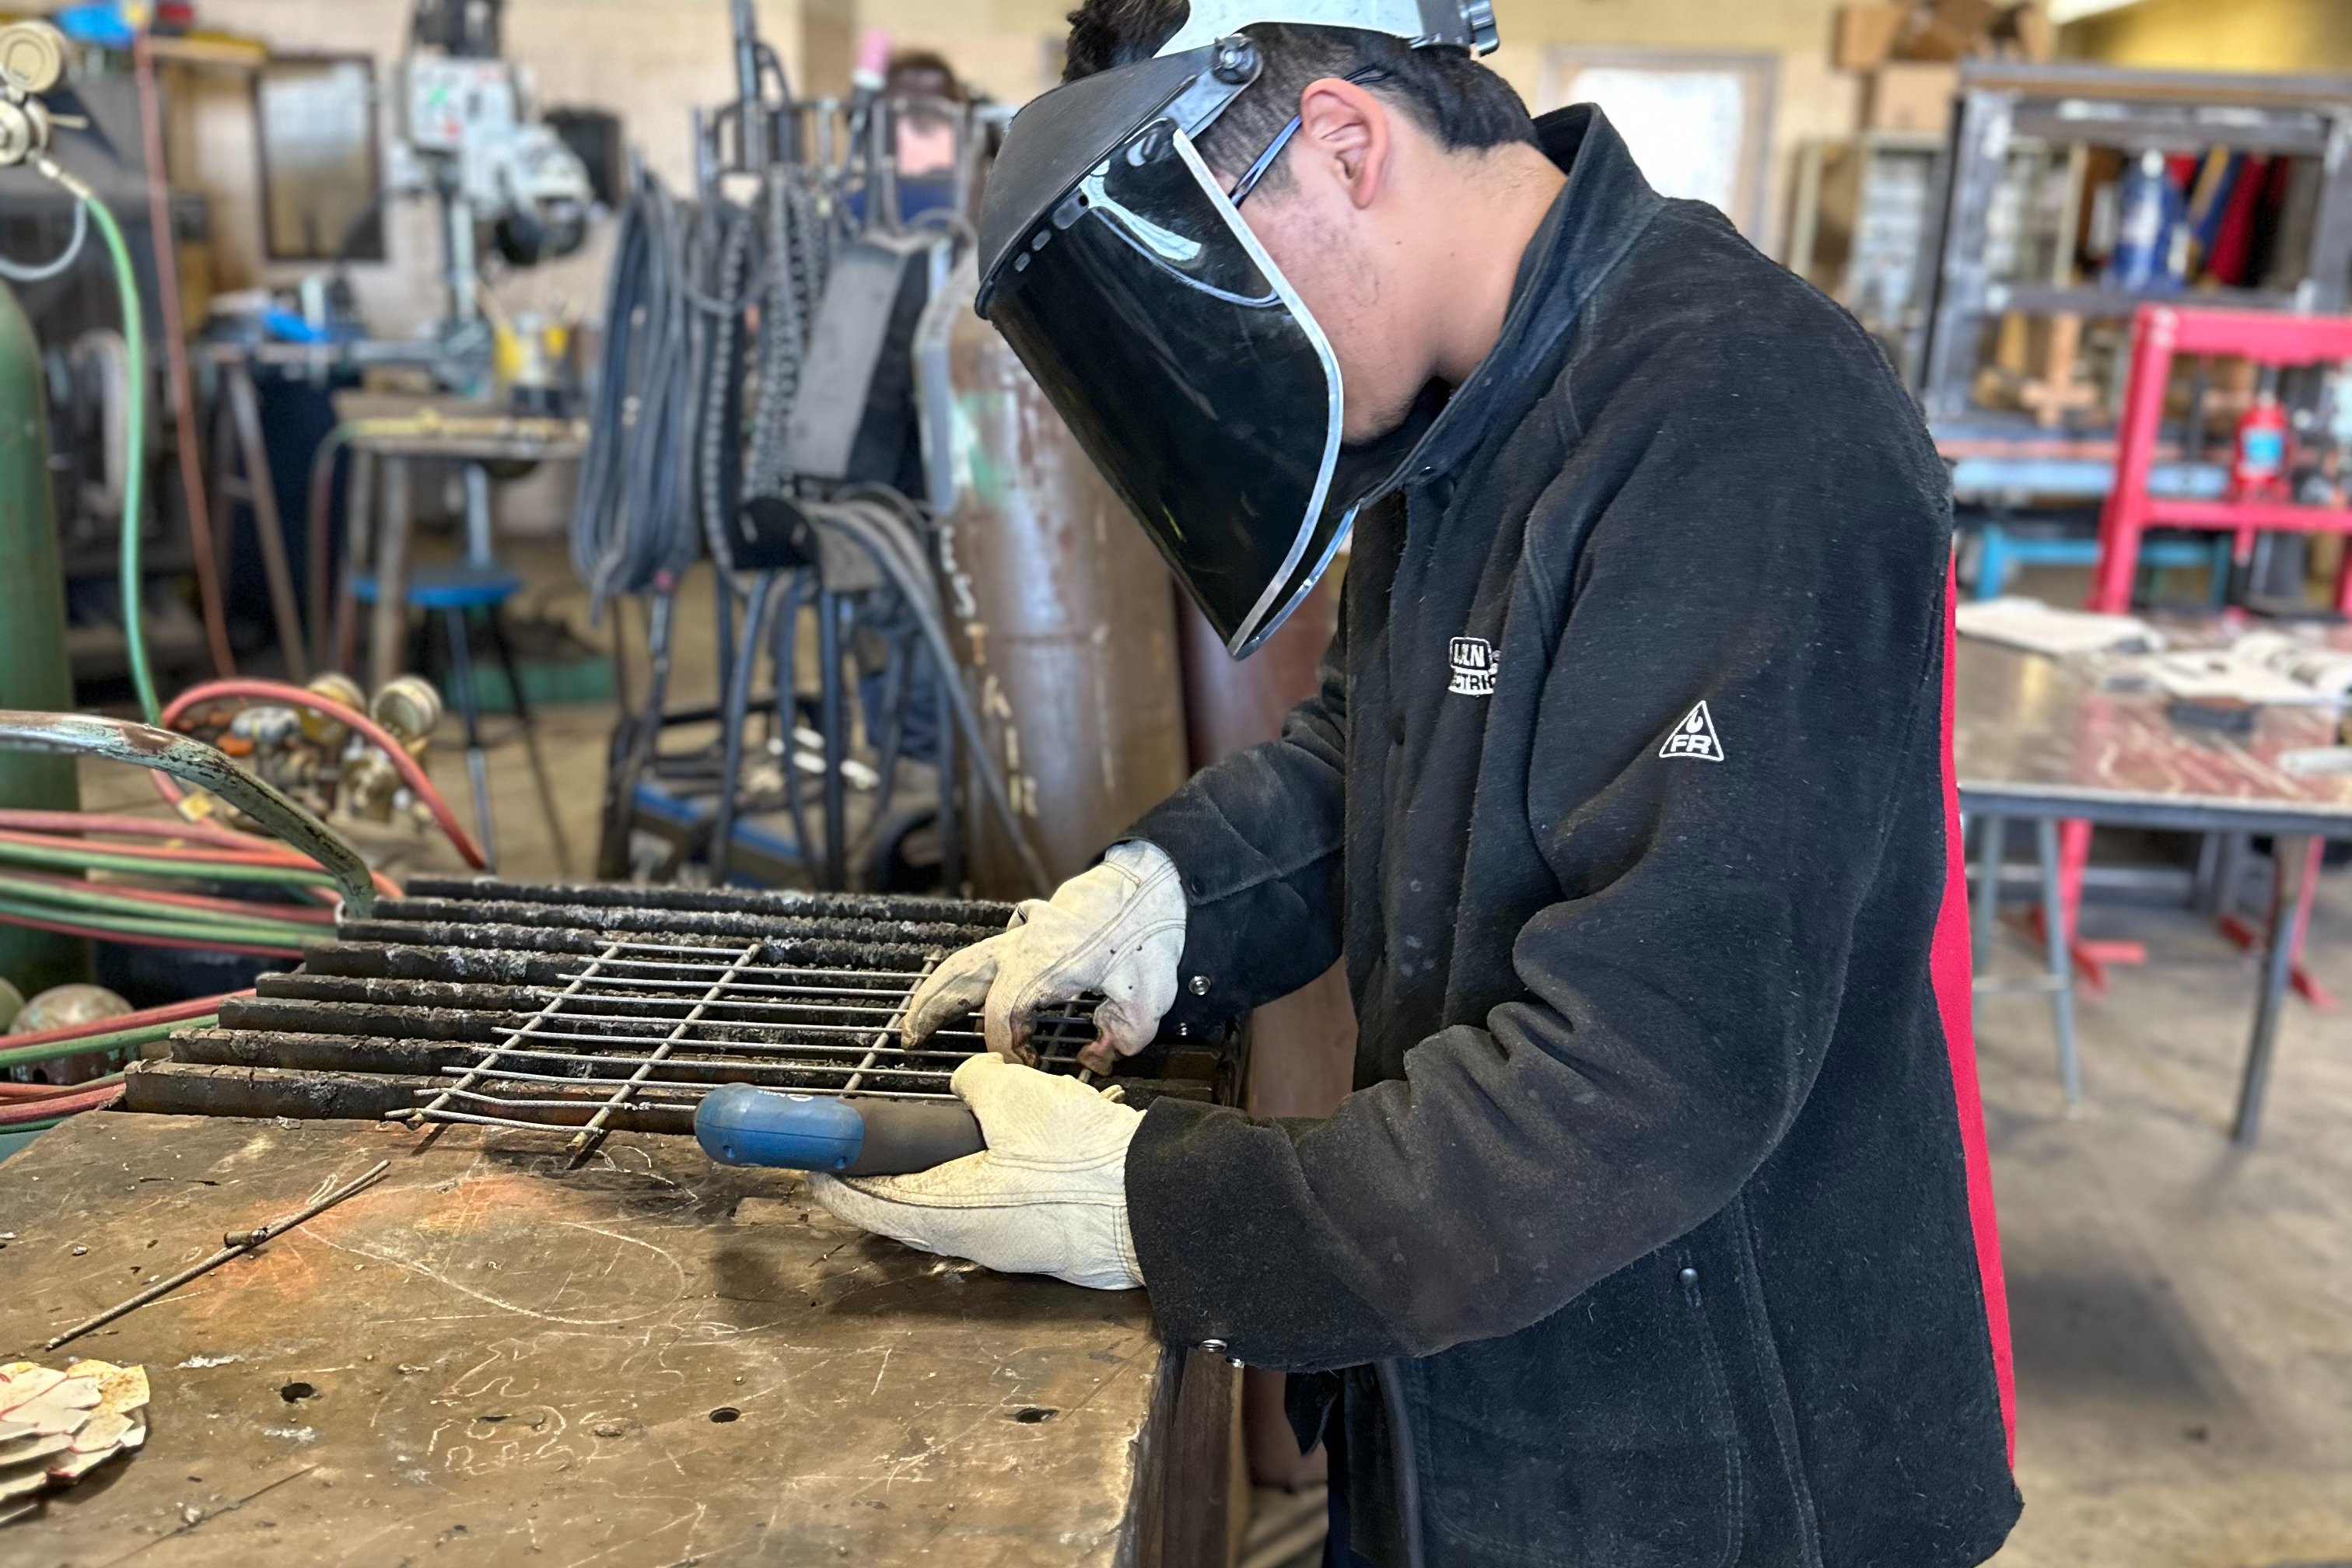 Welding students working on a project